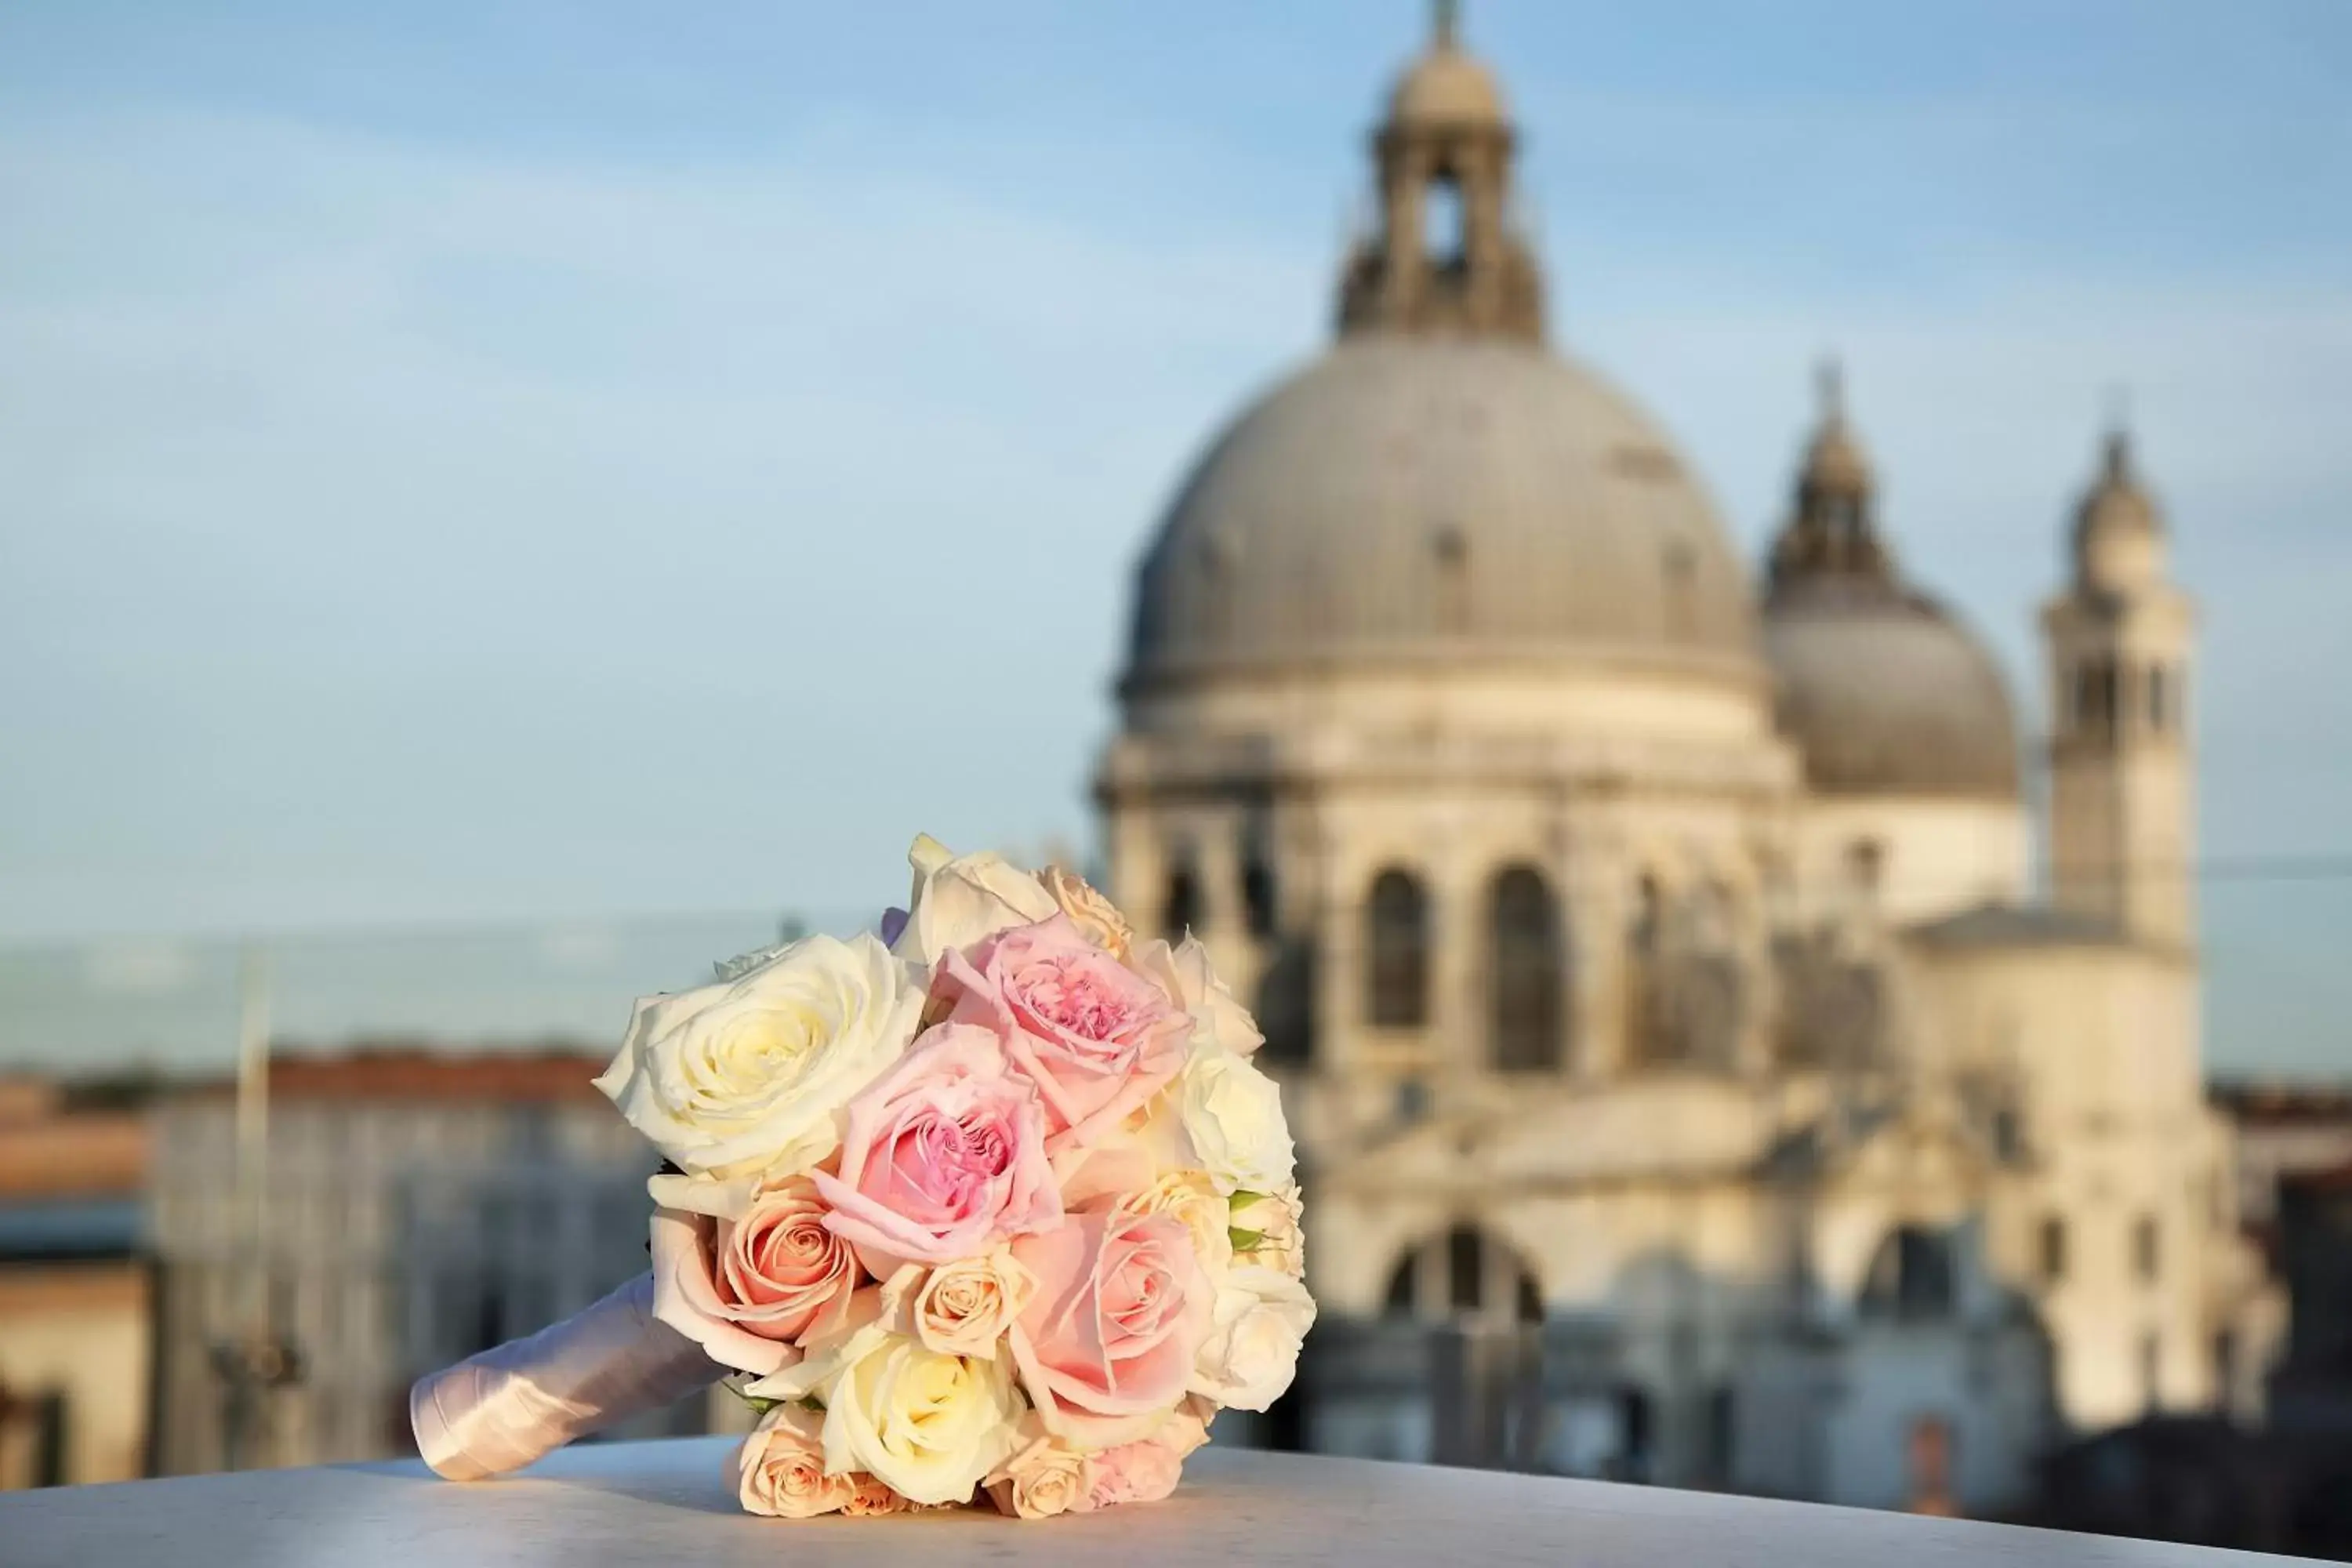 Banquet/Function facilities in The Gritti Palace, a Luxury Collection Hotel, Venice